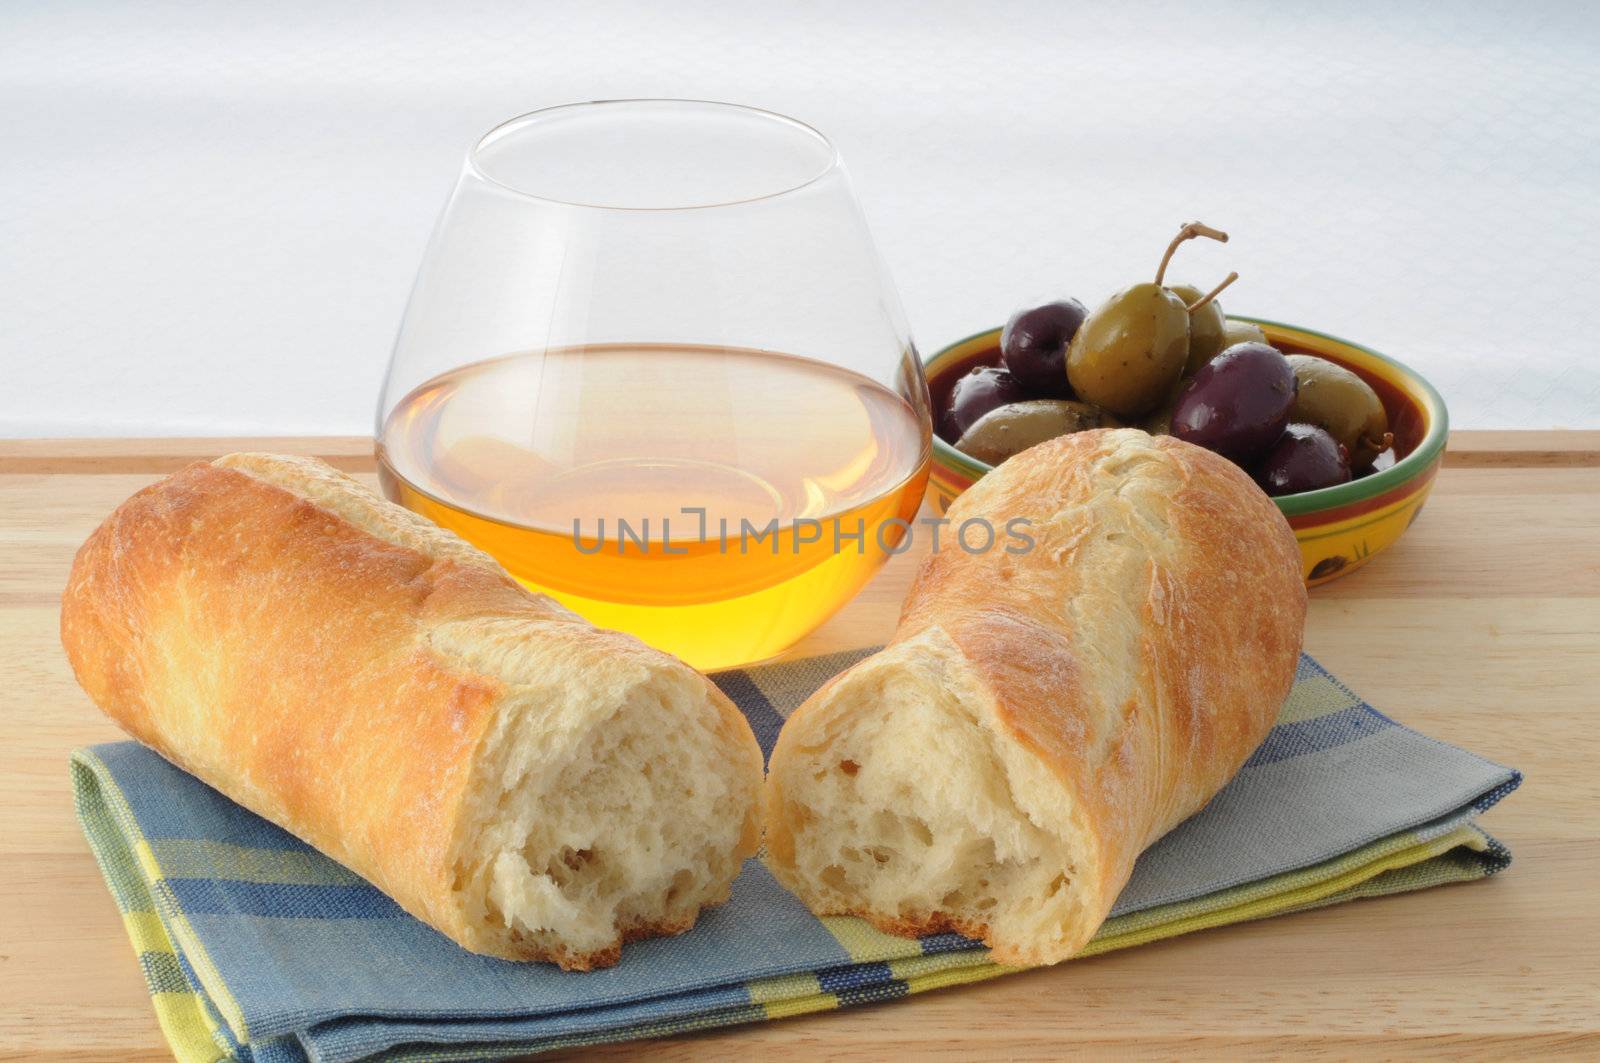 Freshly baked bread with olives and wine.